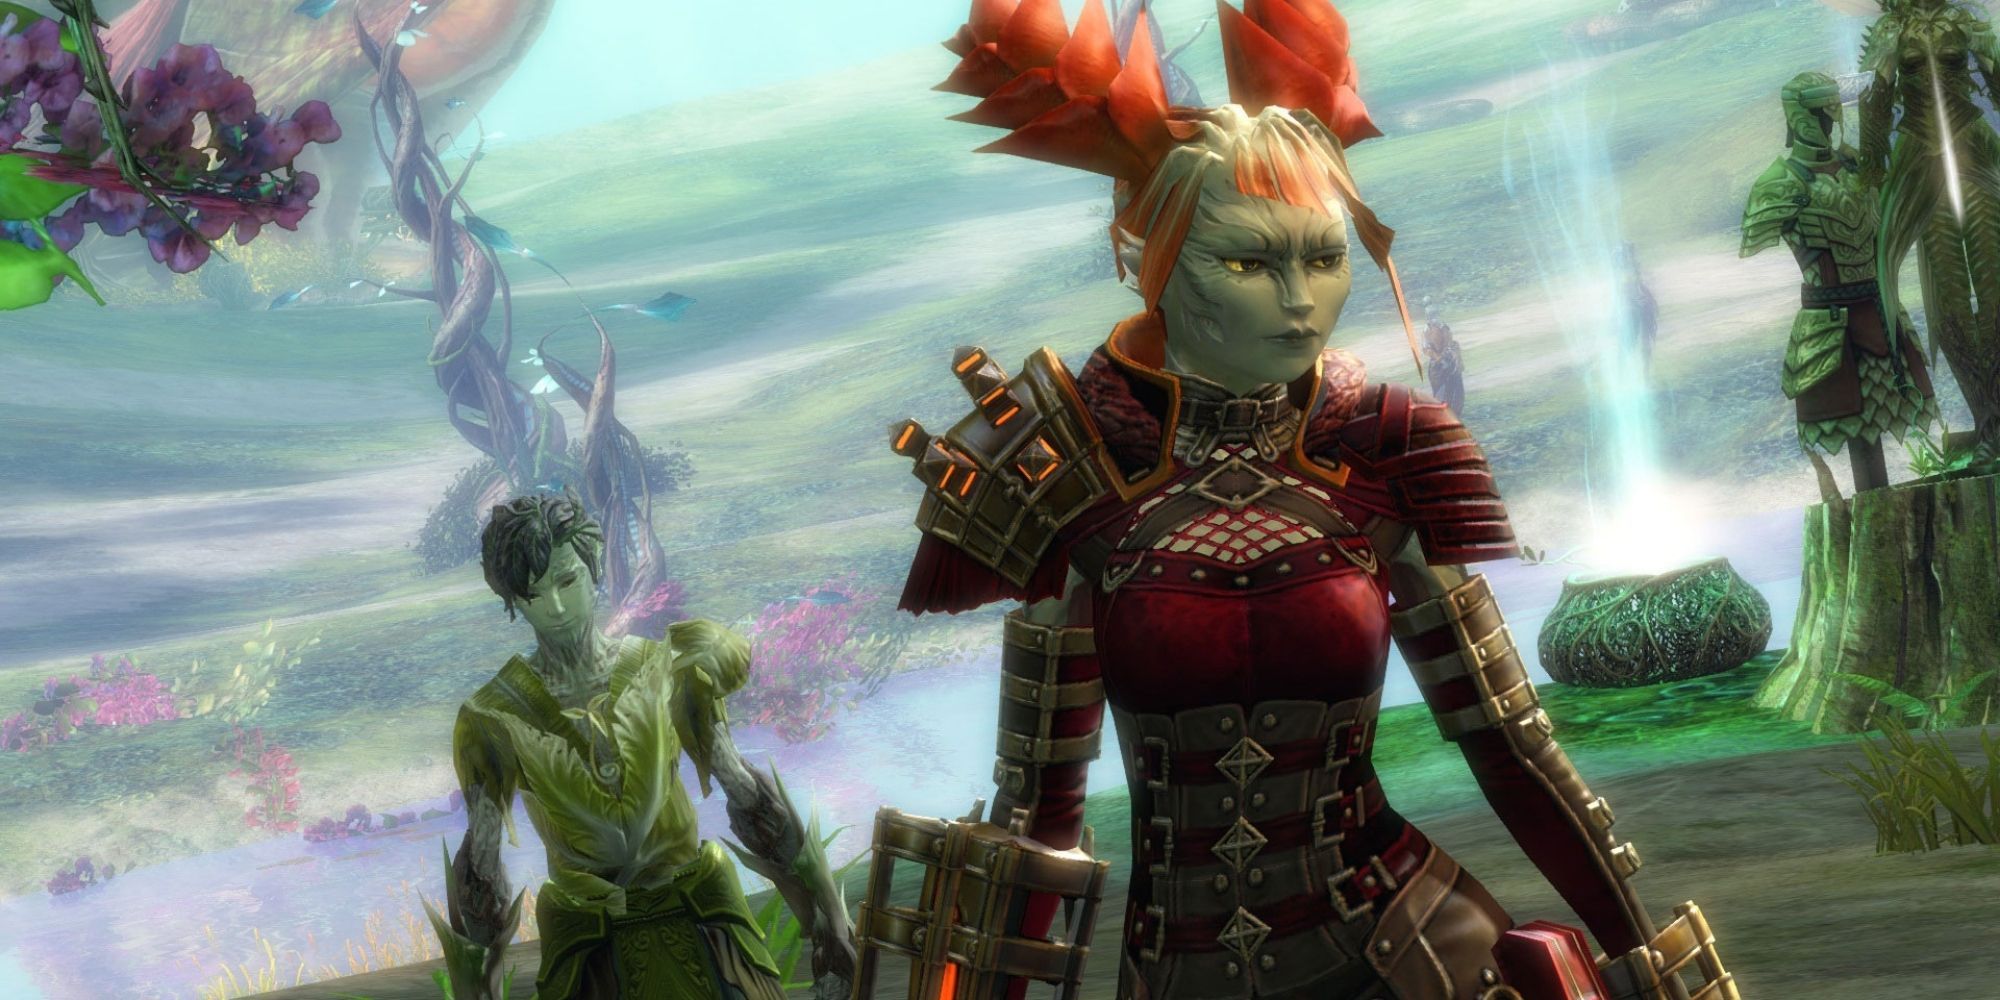 Guild Wars 2 - Scarlet Briar Promo Image (Scarlet Briar on right in foreground, small green sylvari on left in background)